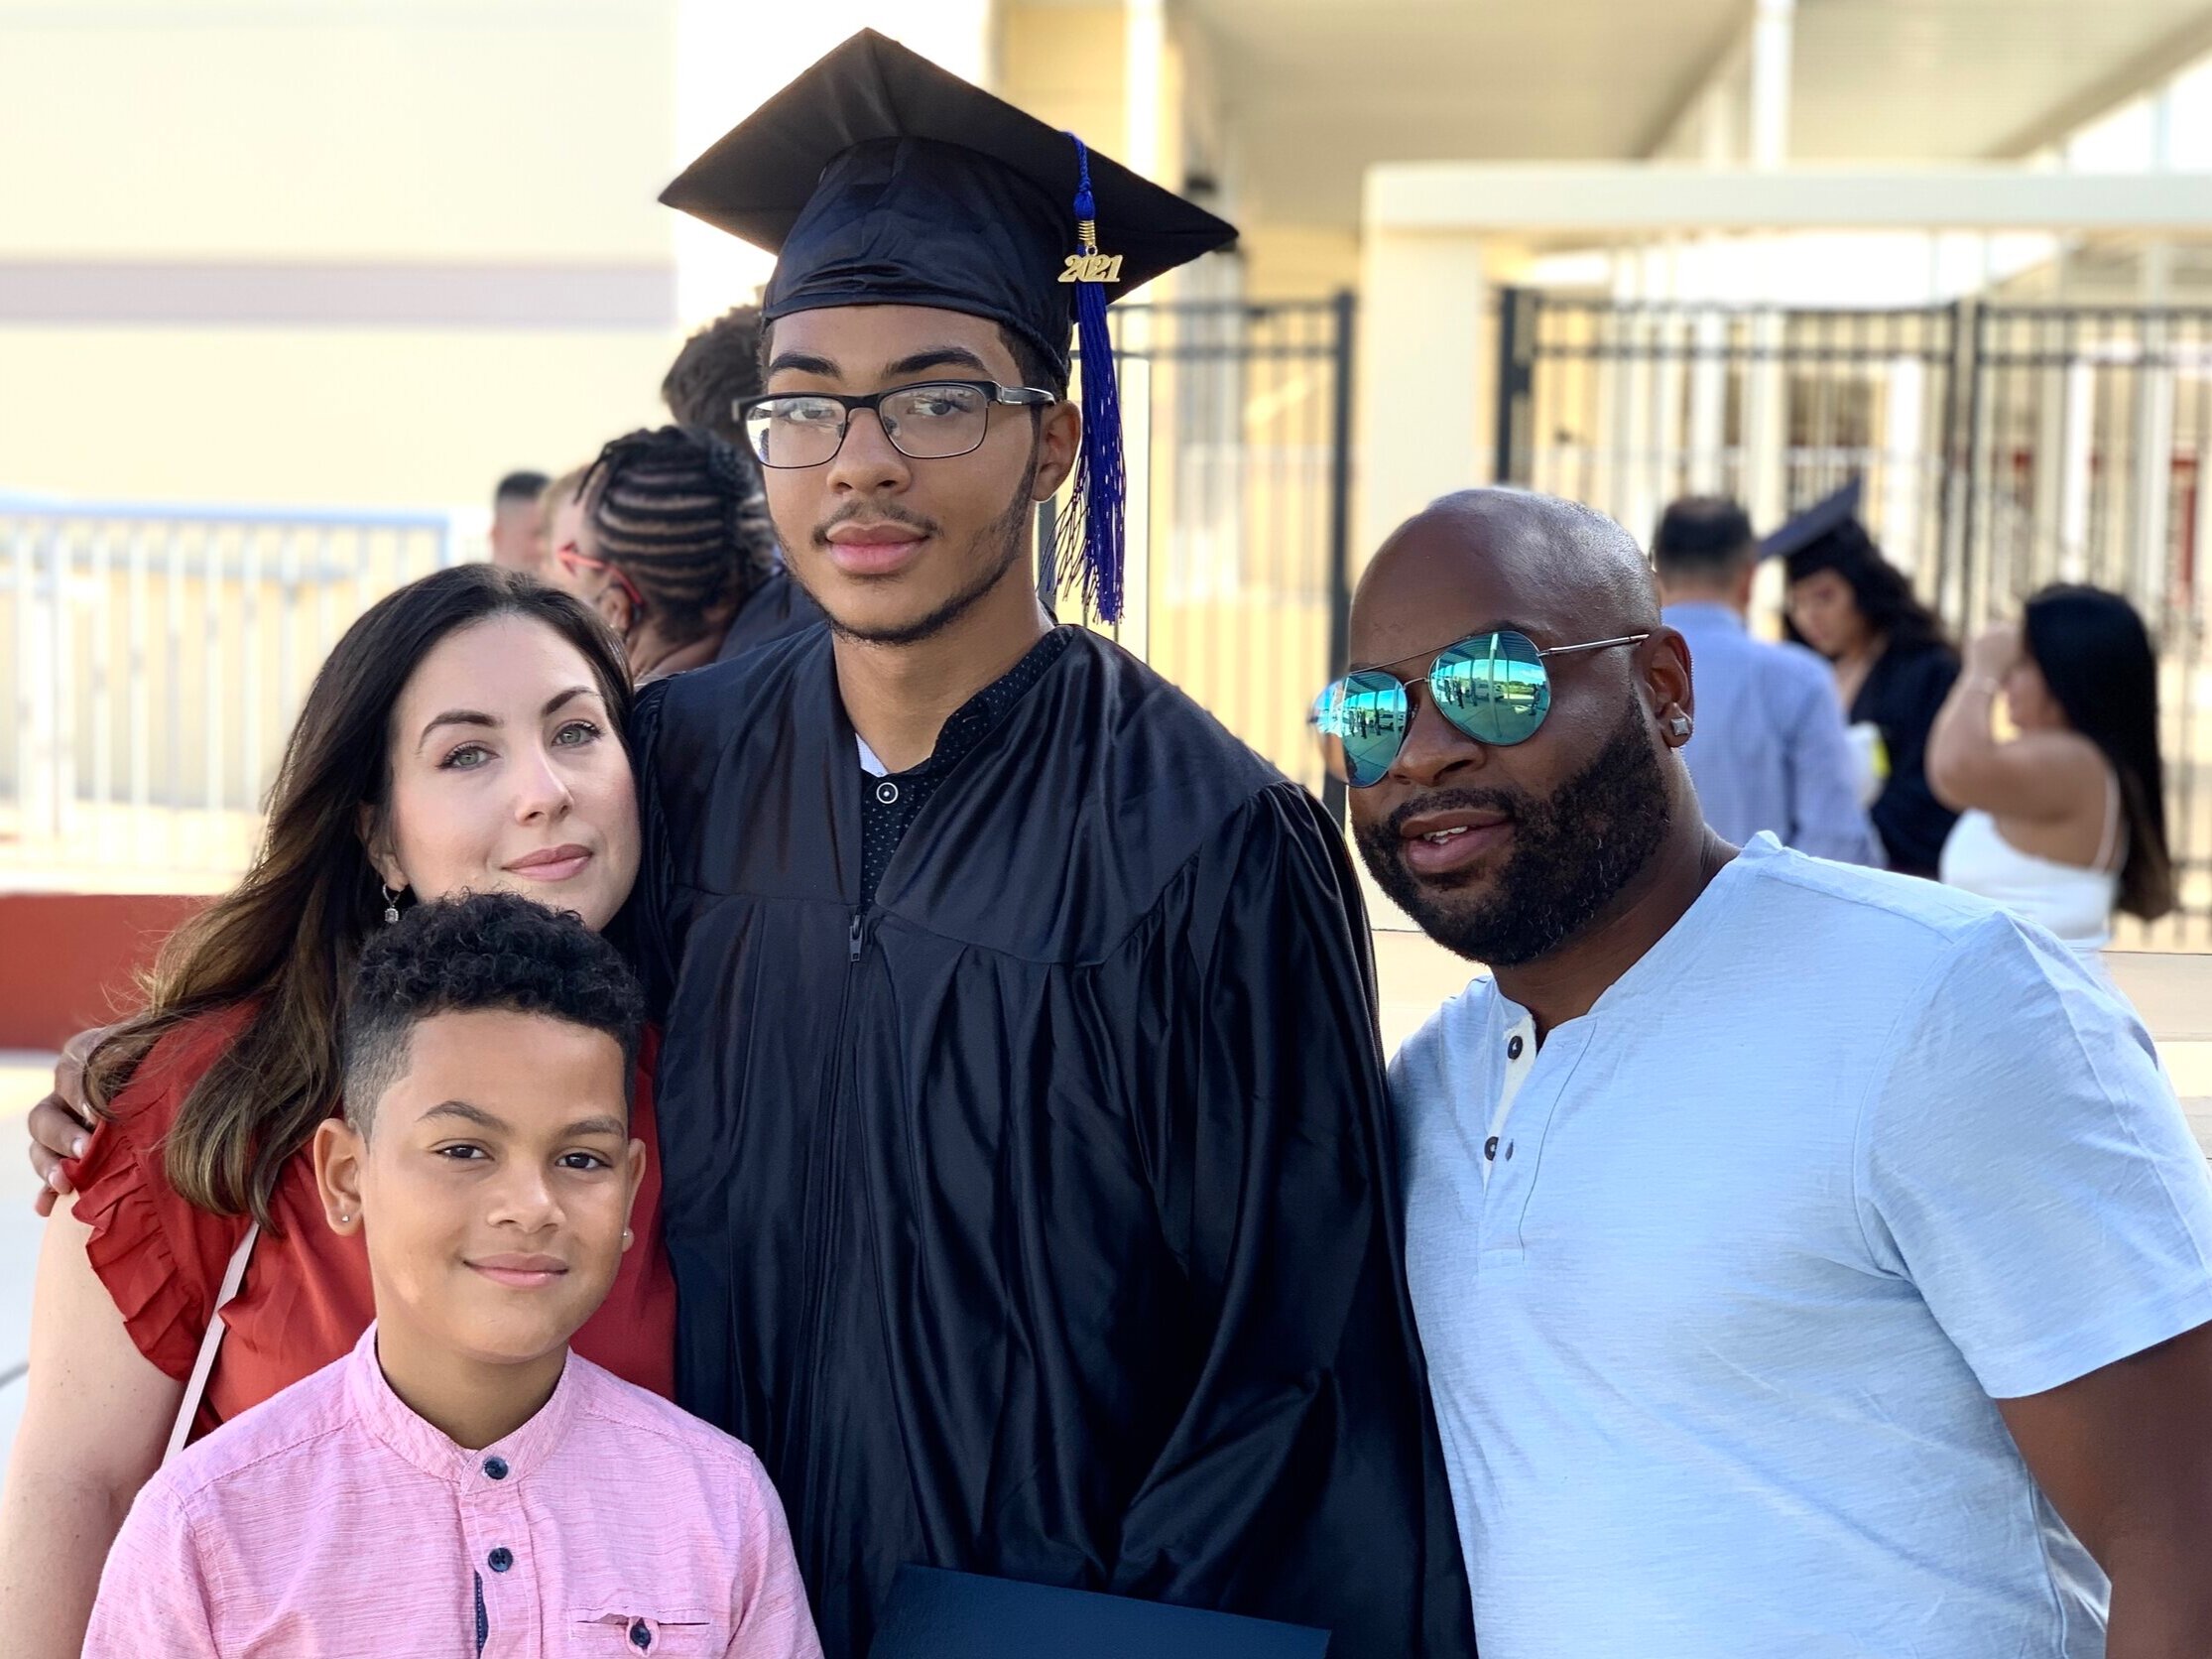 St. Lucie Acceleration Academies graduate Juvan Lester smiles with family